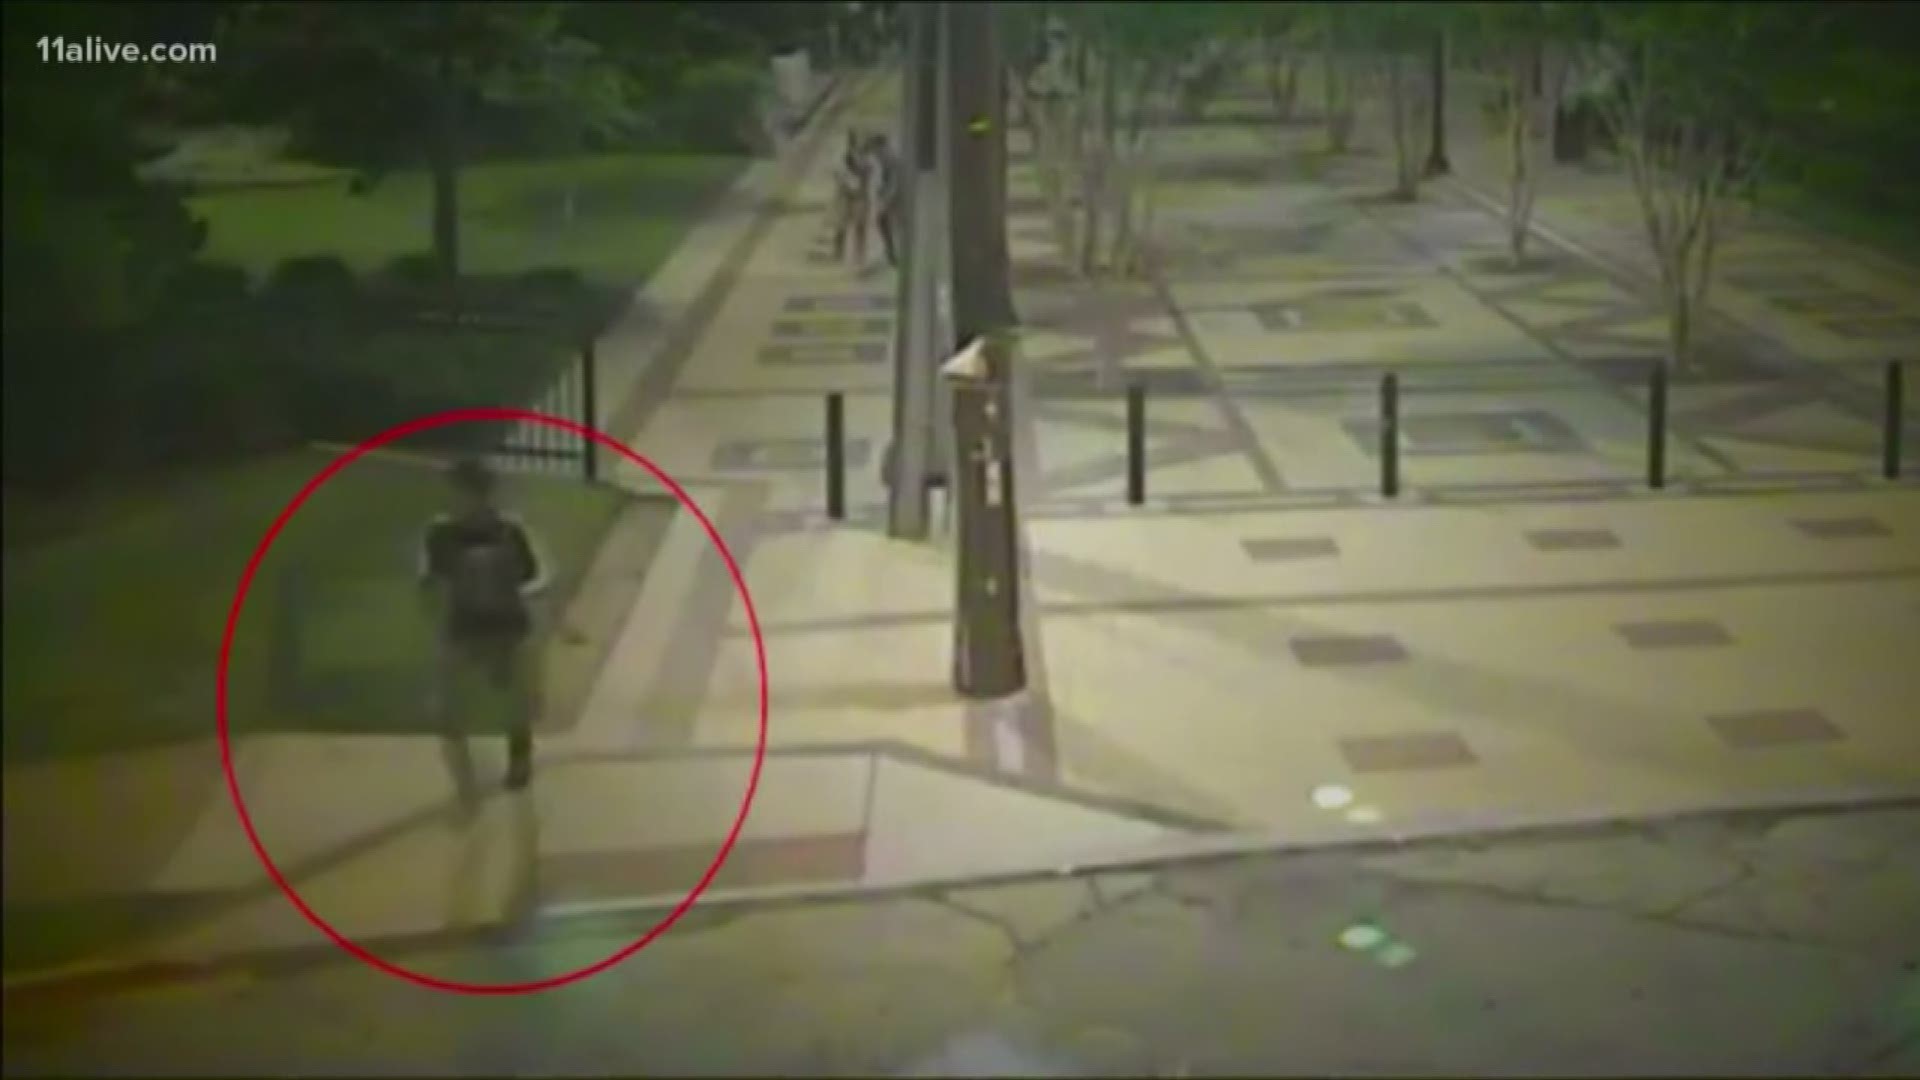 New video of that second suspect shows him running away from the crime scene, following the shooting.